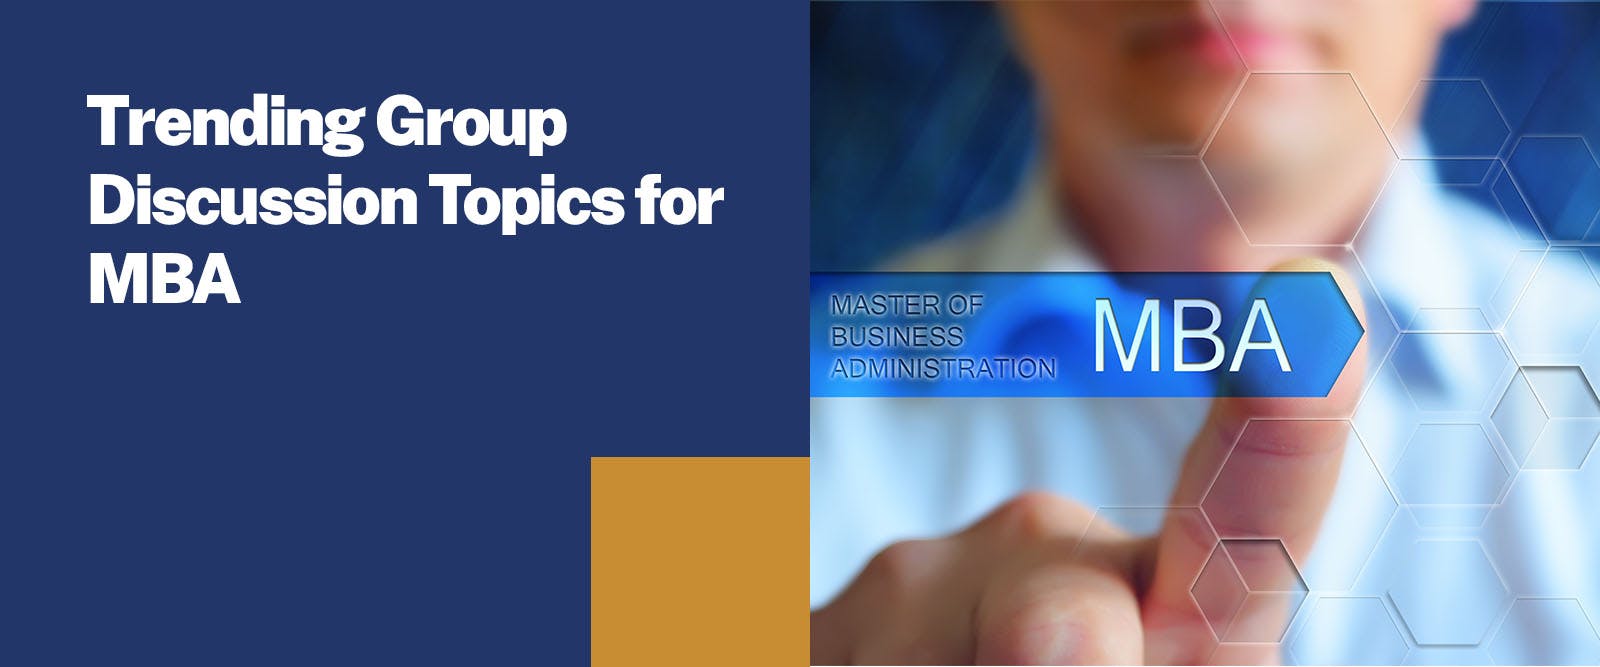 Trending Group Discussion Topics for MBA